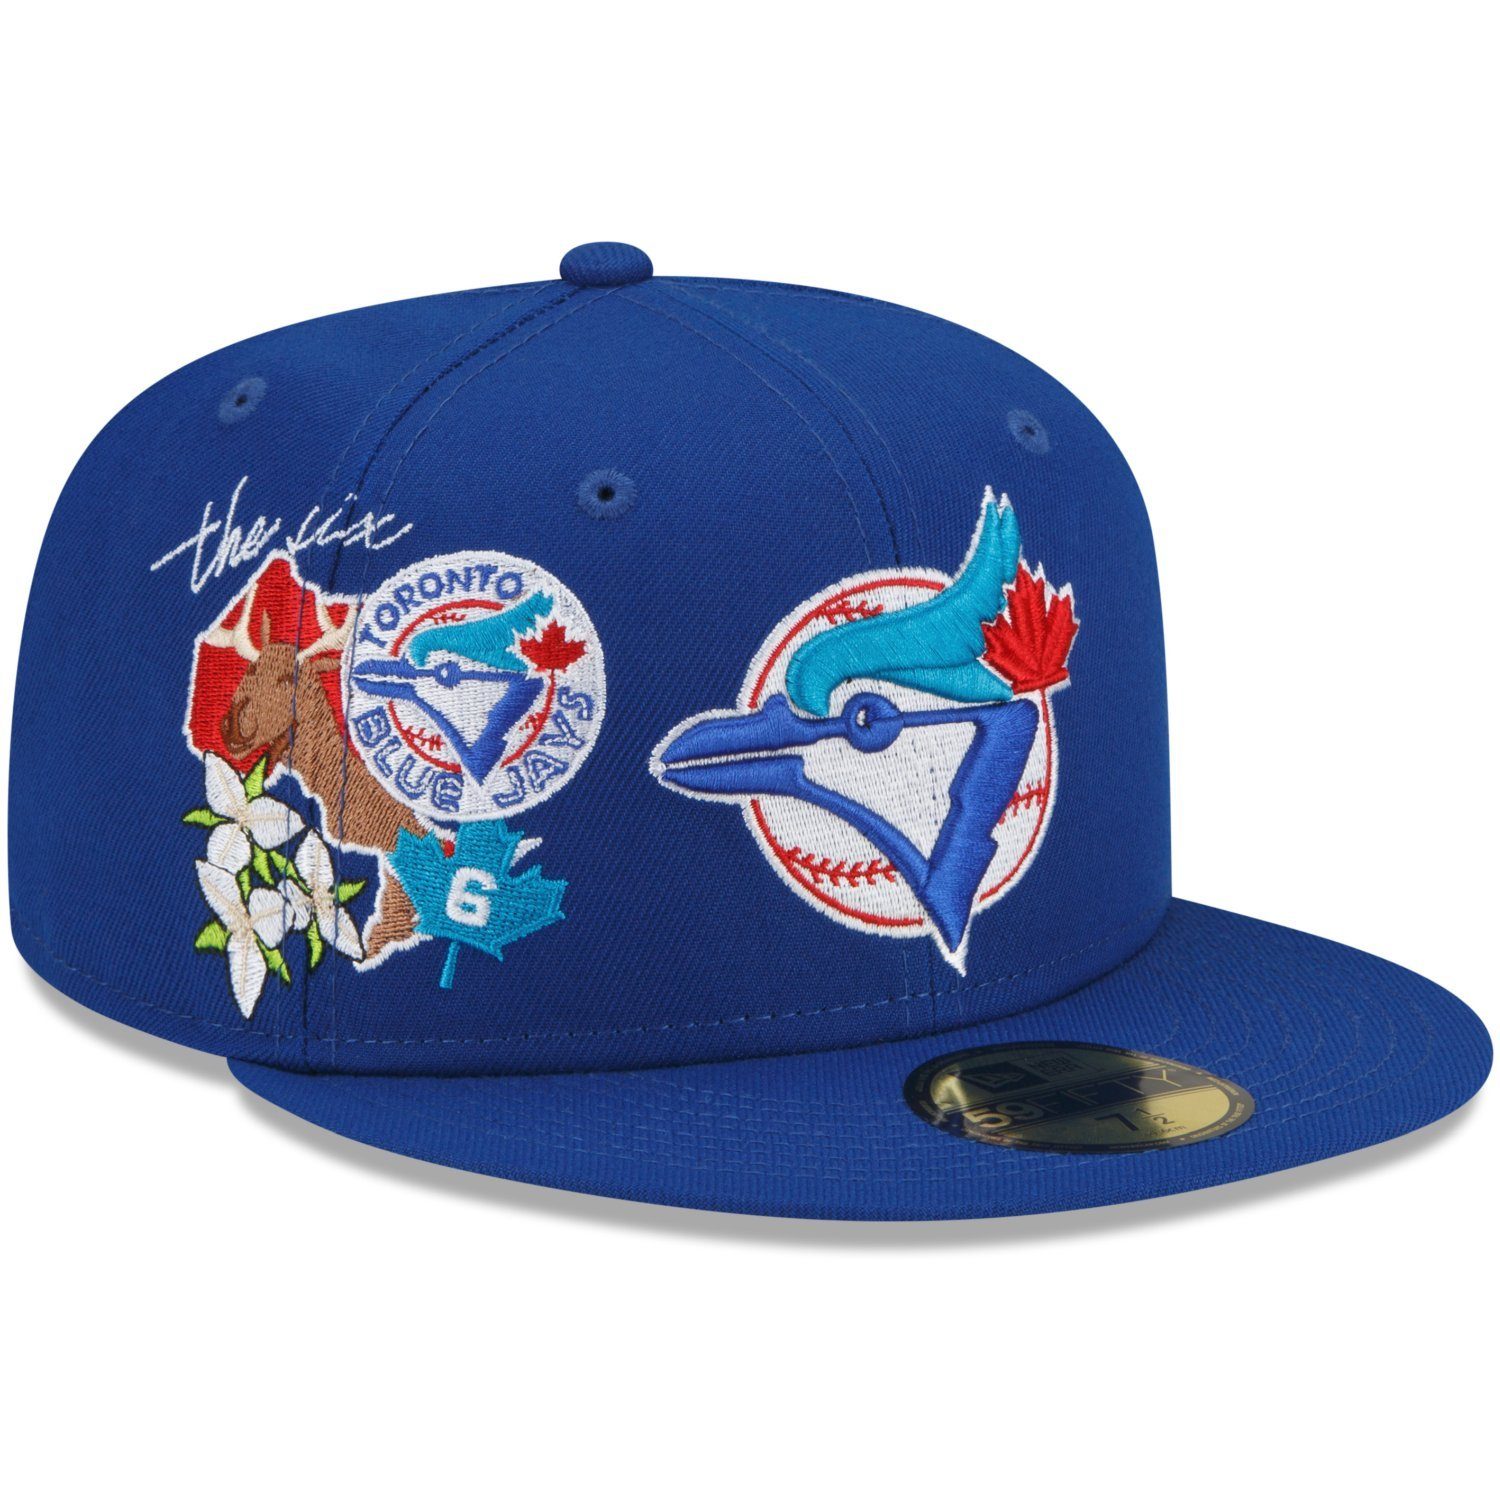 New Era Fitted Cap 59Fifty CITY CLUSTER Toronto Jays | Fitted Caps